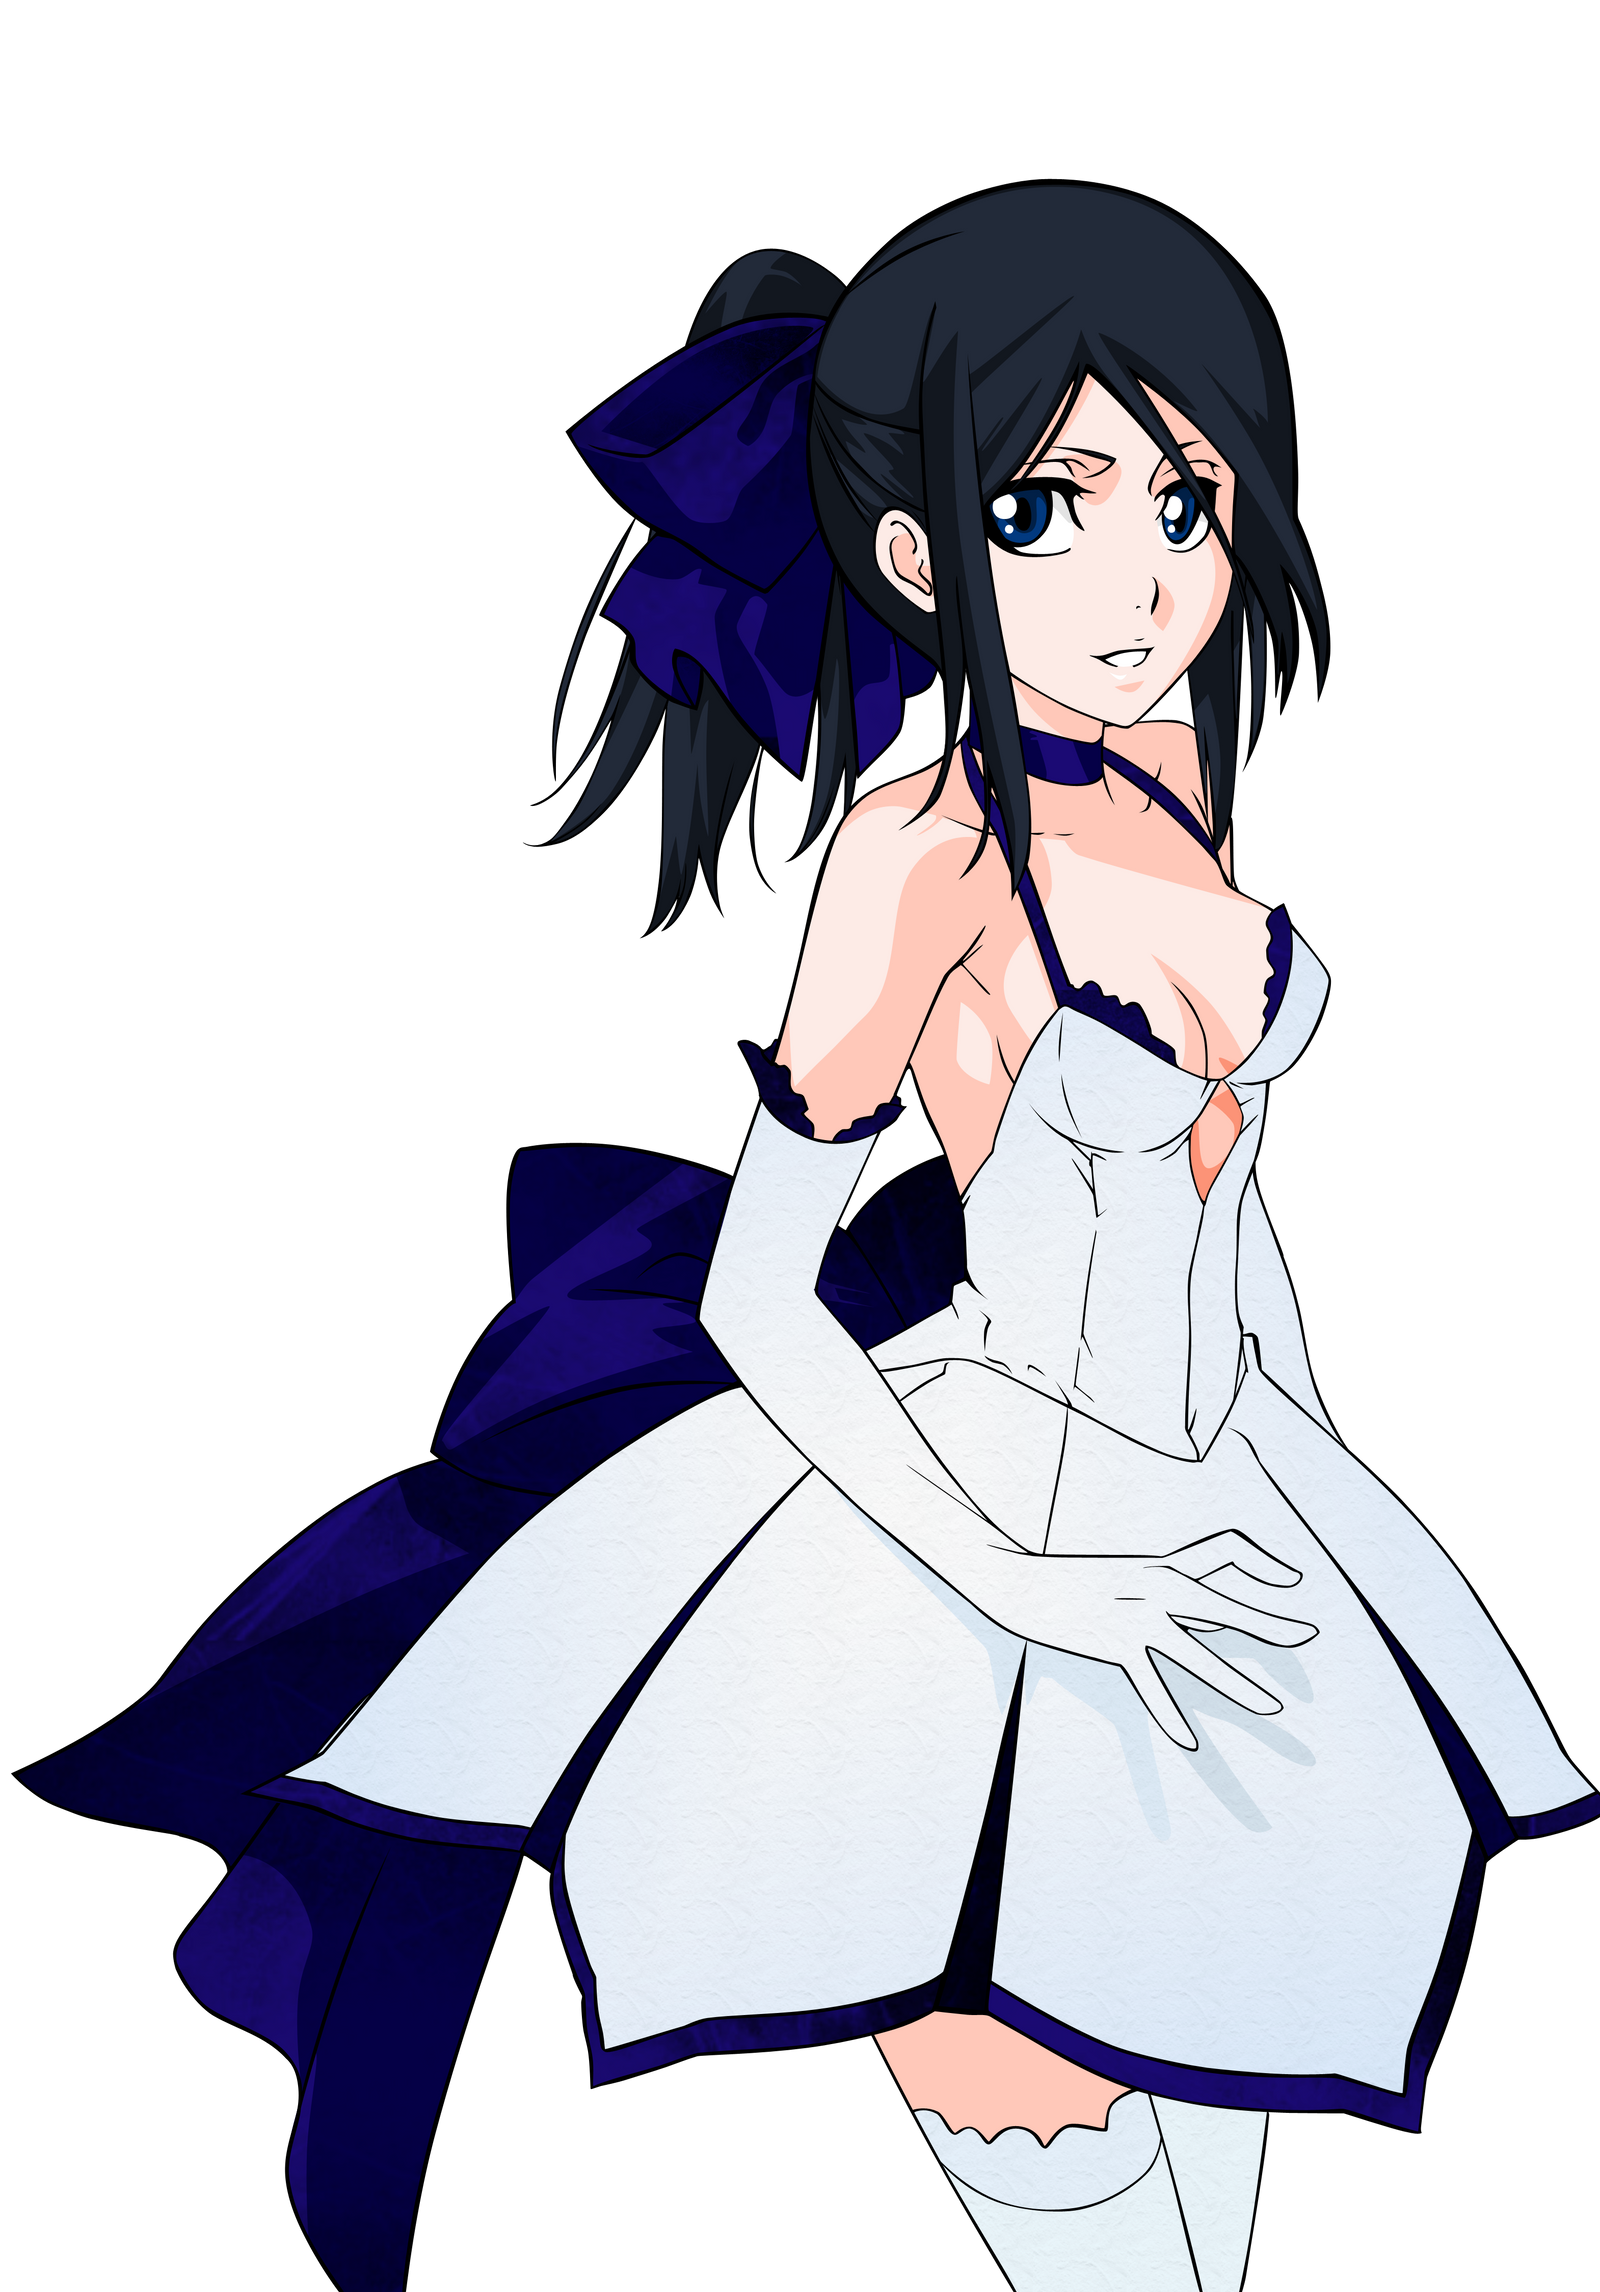 rukia_kuchiki_sexy_by_narusailor-d4pmy20.png